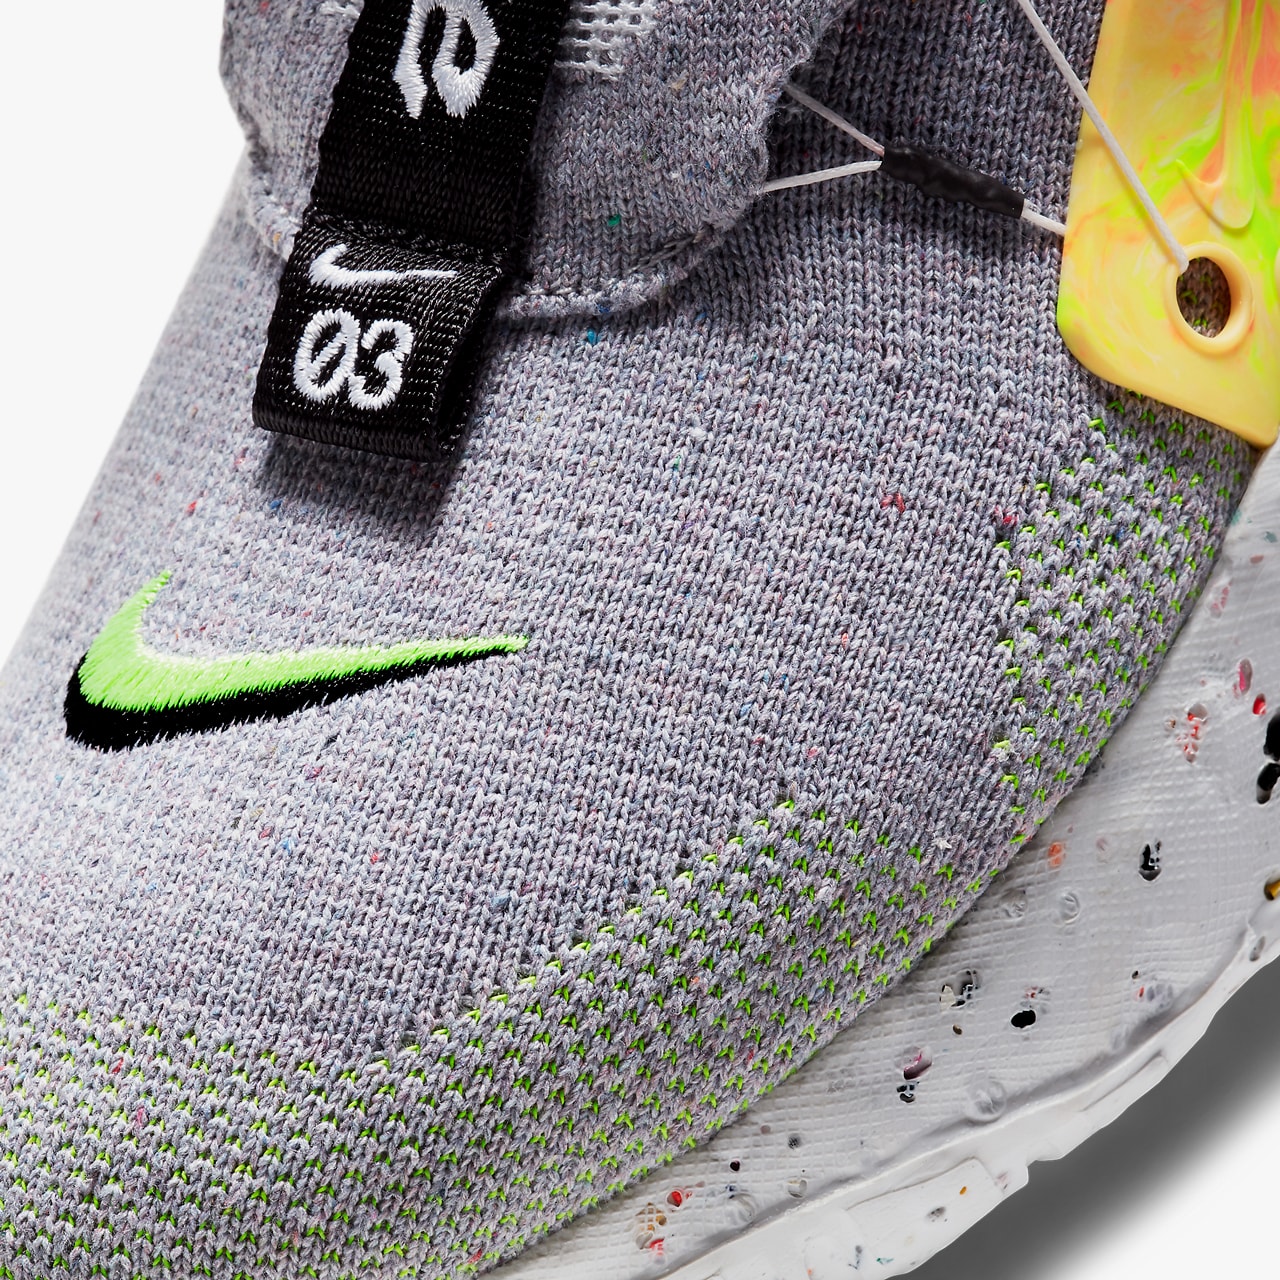 nike sportswear space hippie 01 02 03 04 volt collection grey black CQ3989 CQ3988 CQ3986 002 CD3476 001 official release date info photos price store list buying guide